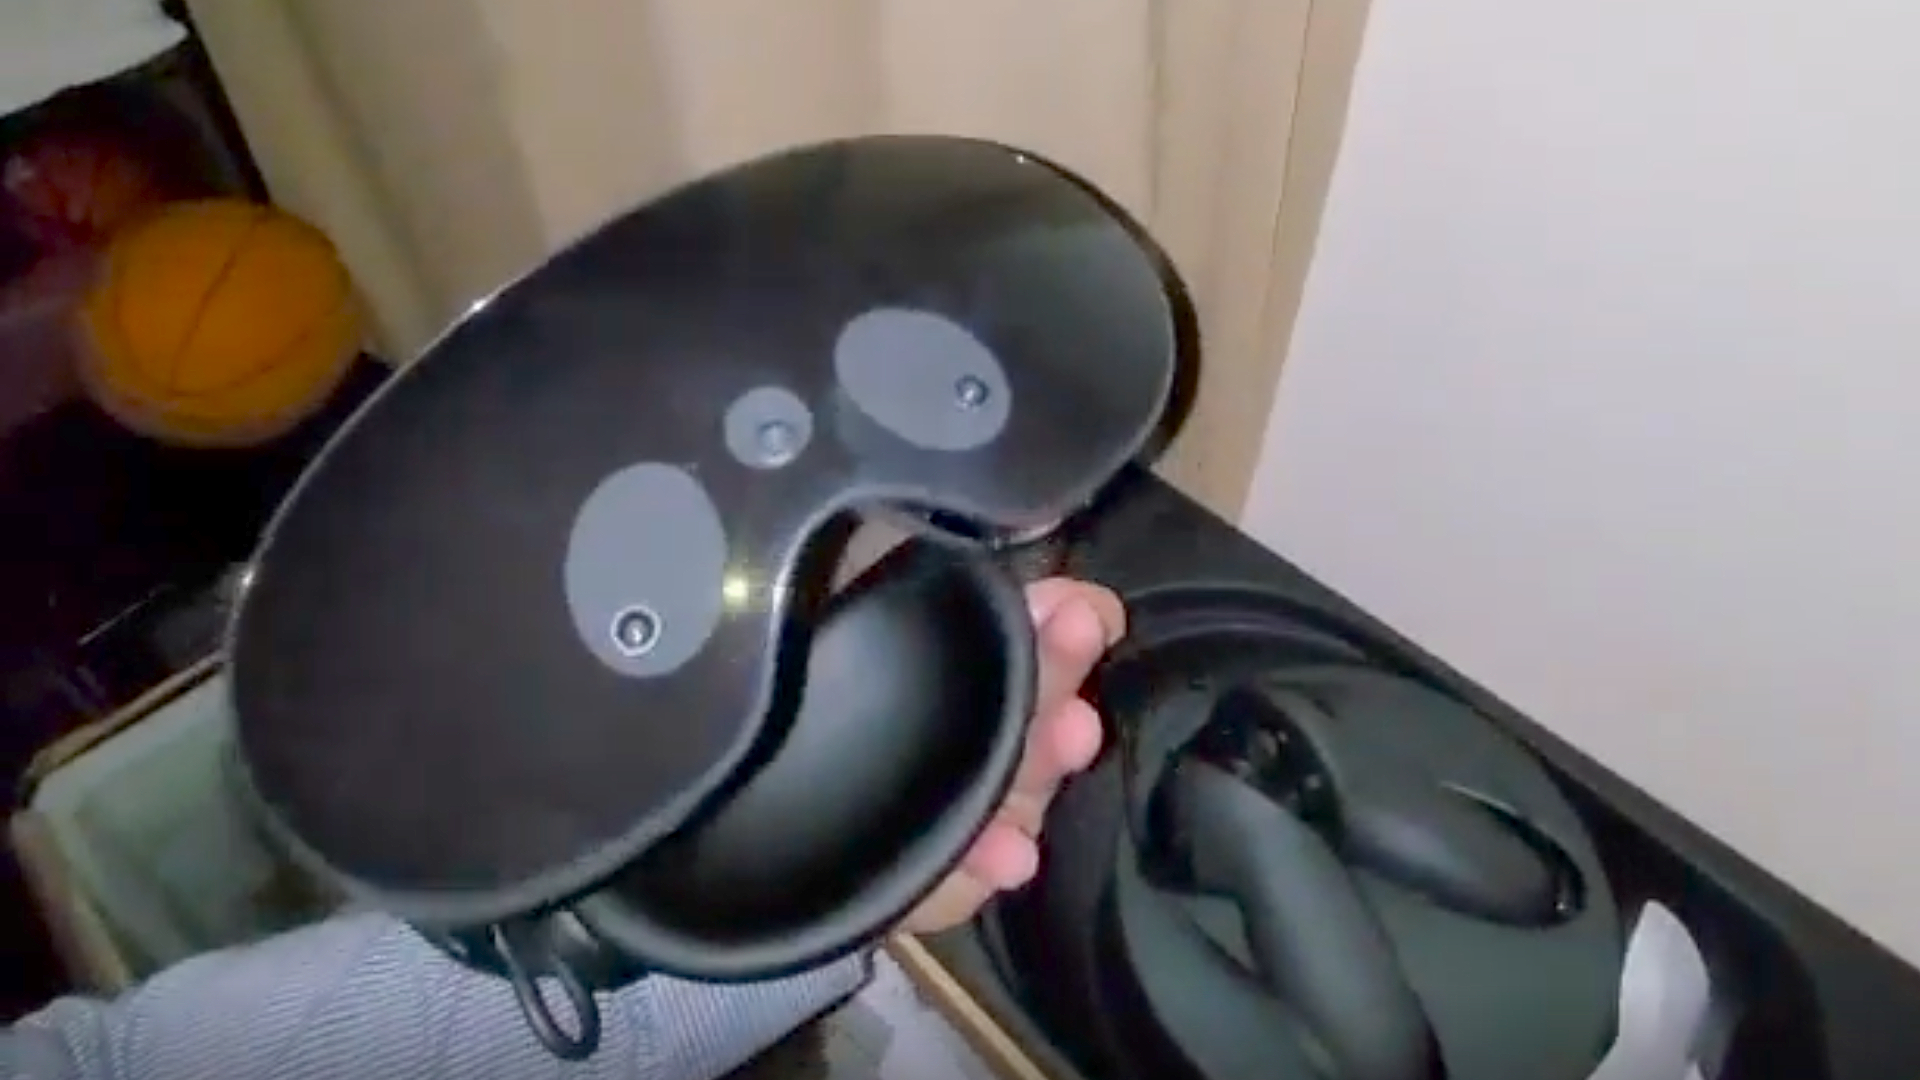 Quest Pro: Video screenshot of Oculus Quest 2 successor with hand holding black headset